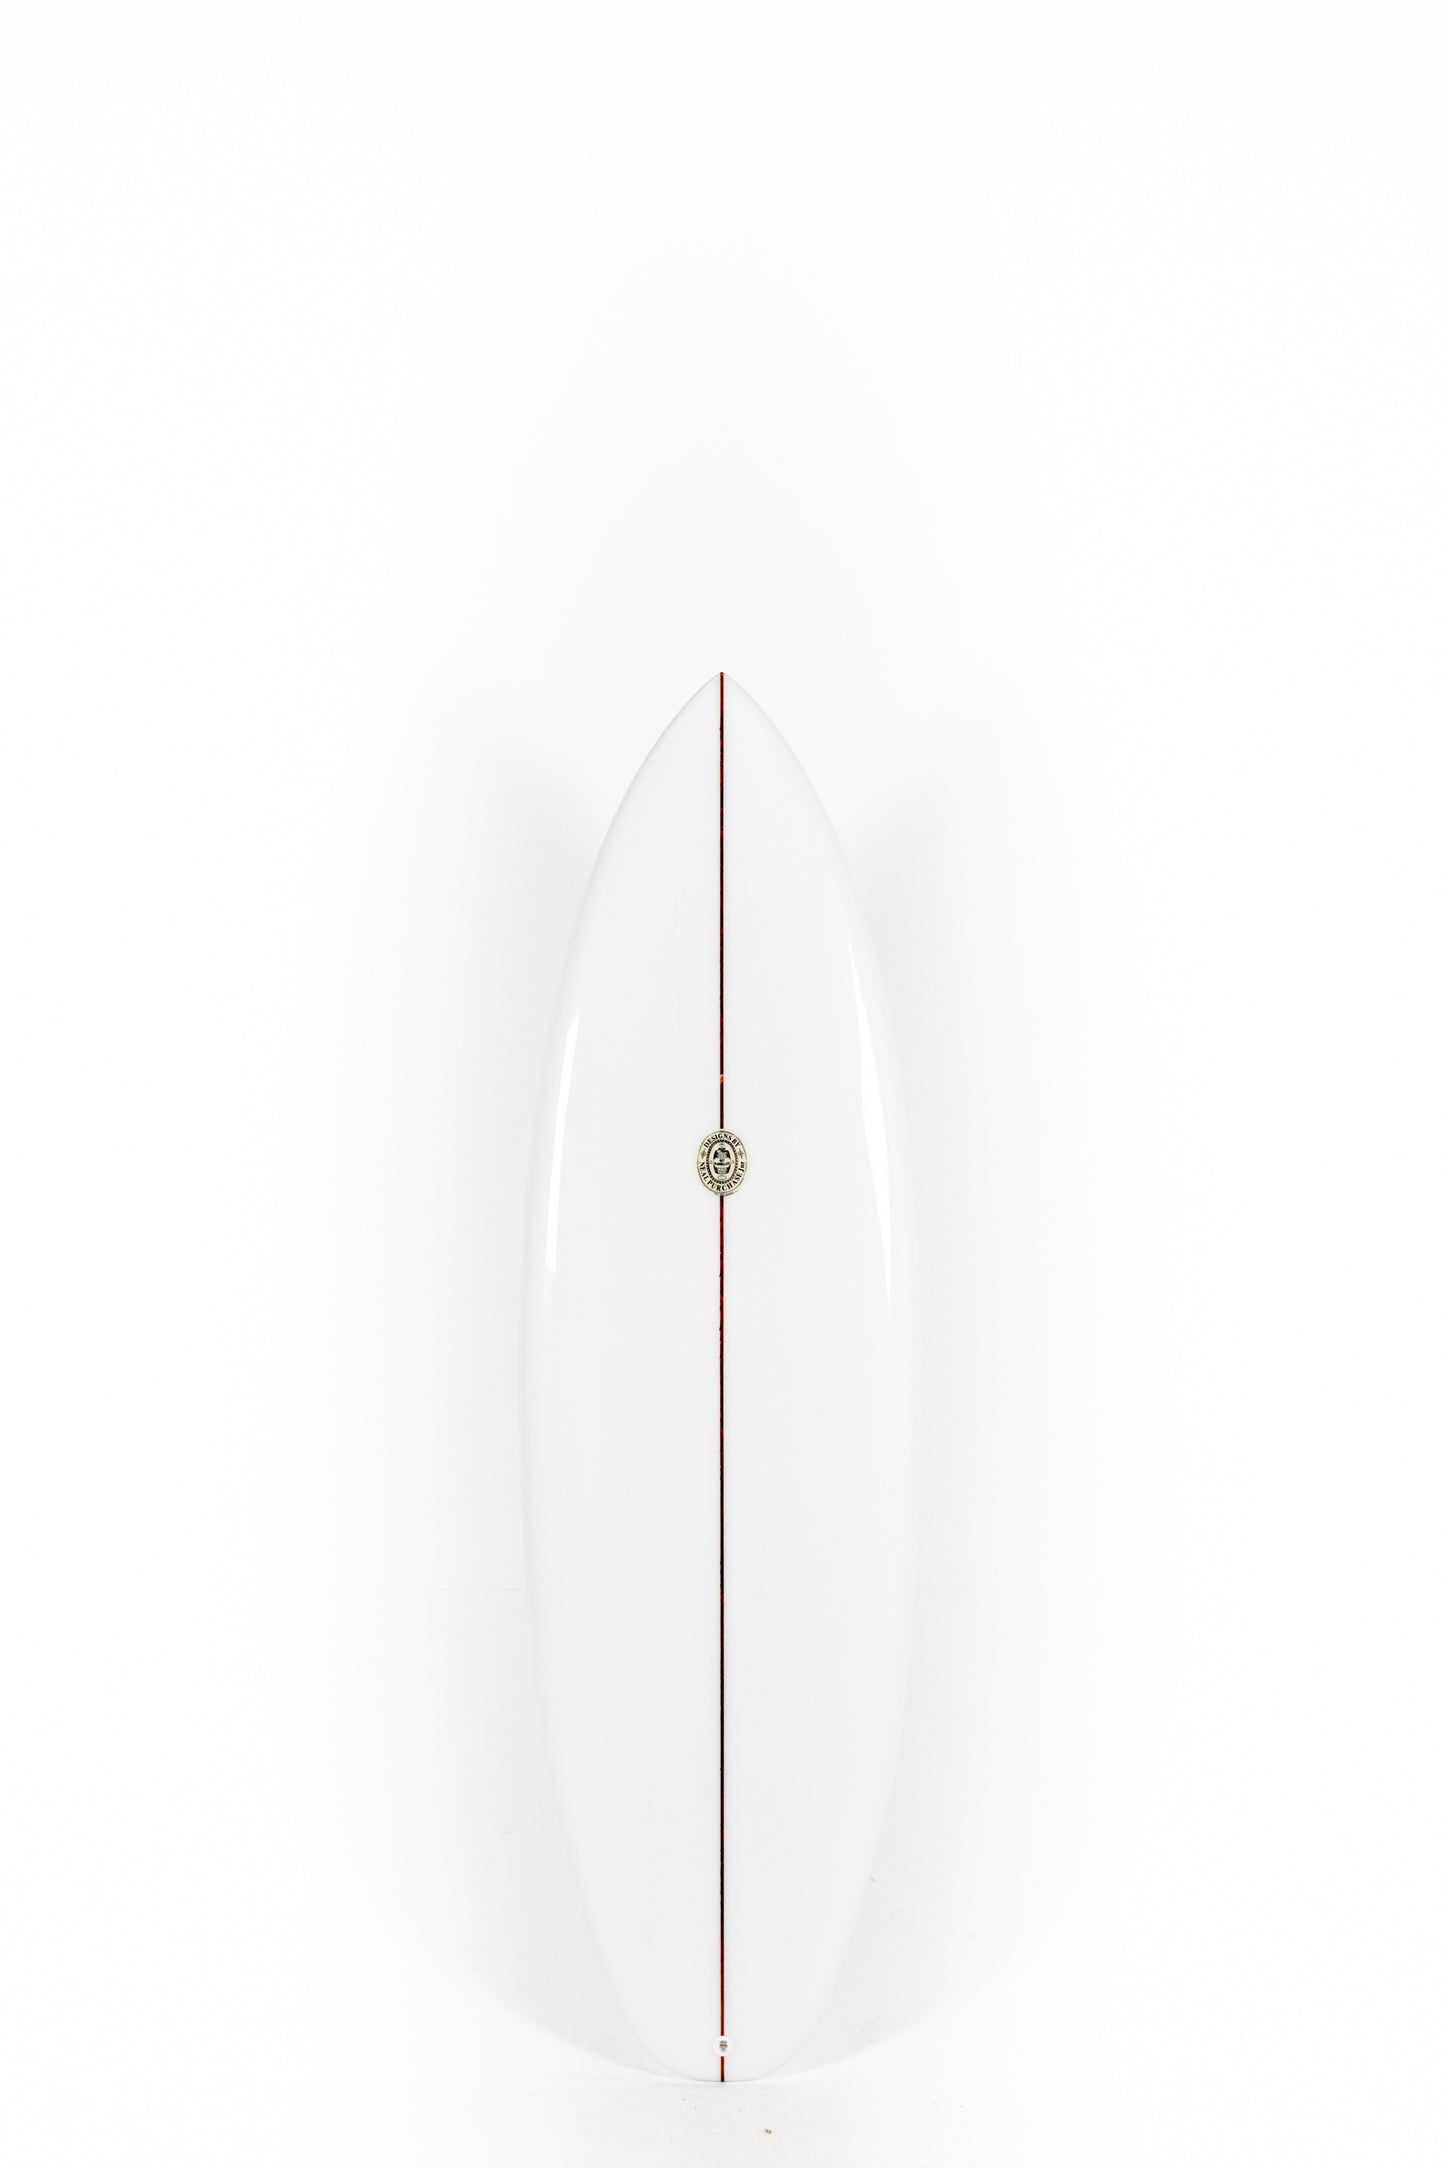 Neal Purchase Jnr Surfboards - DUO STAGE 2 - 6'2